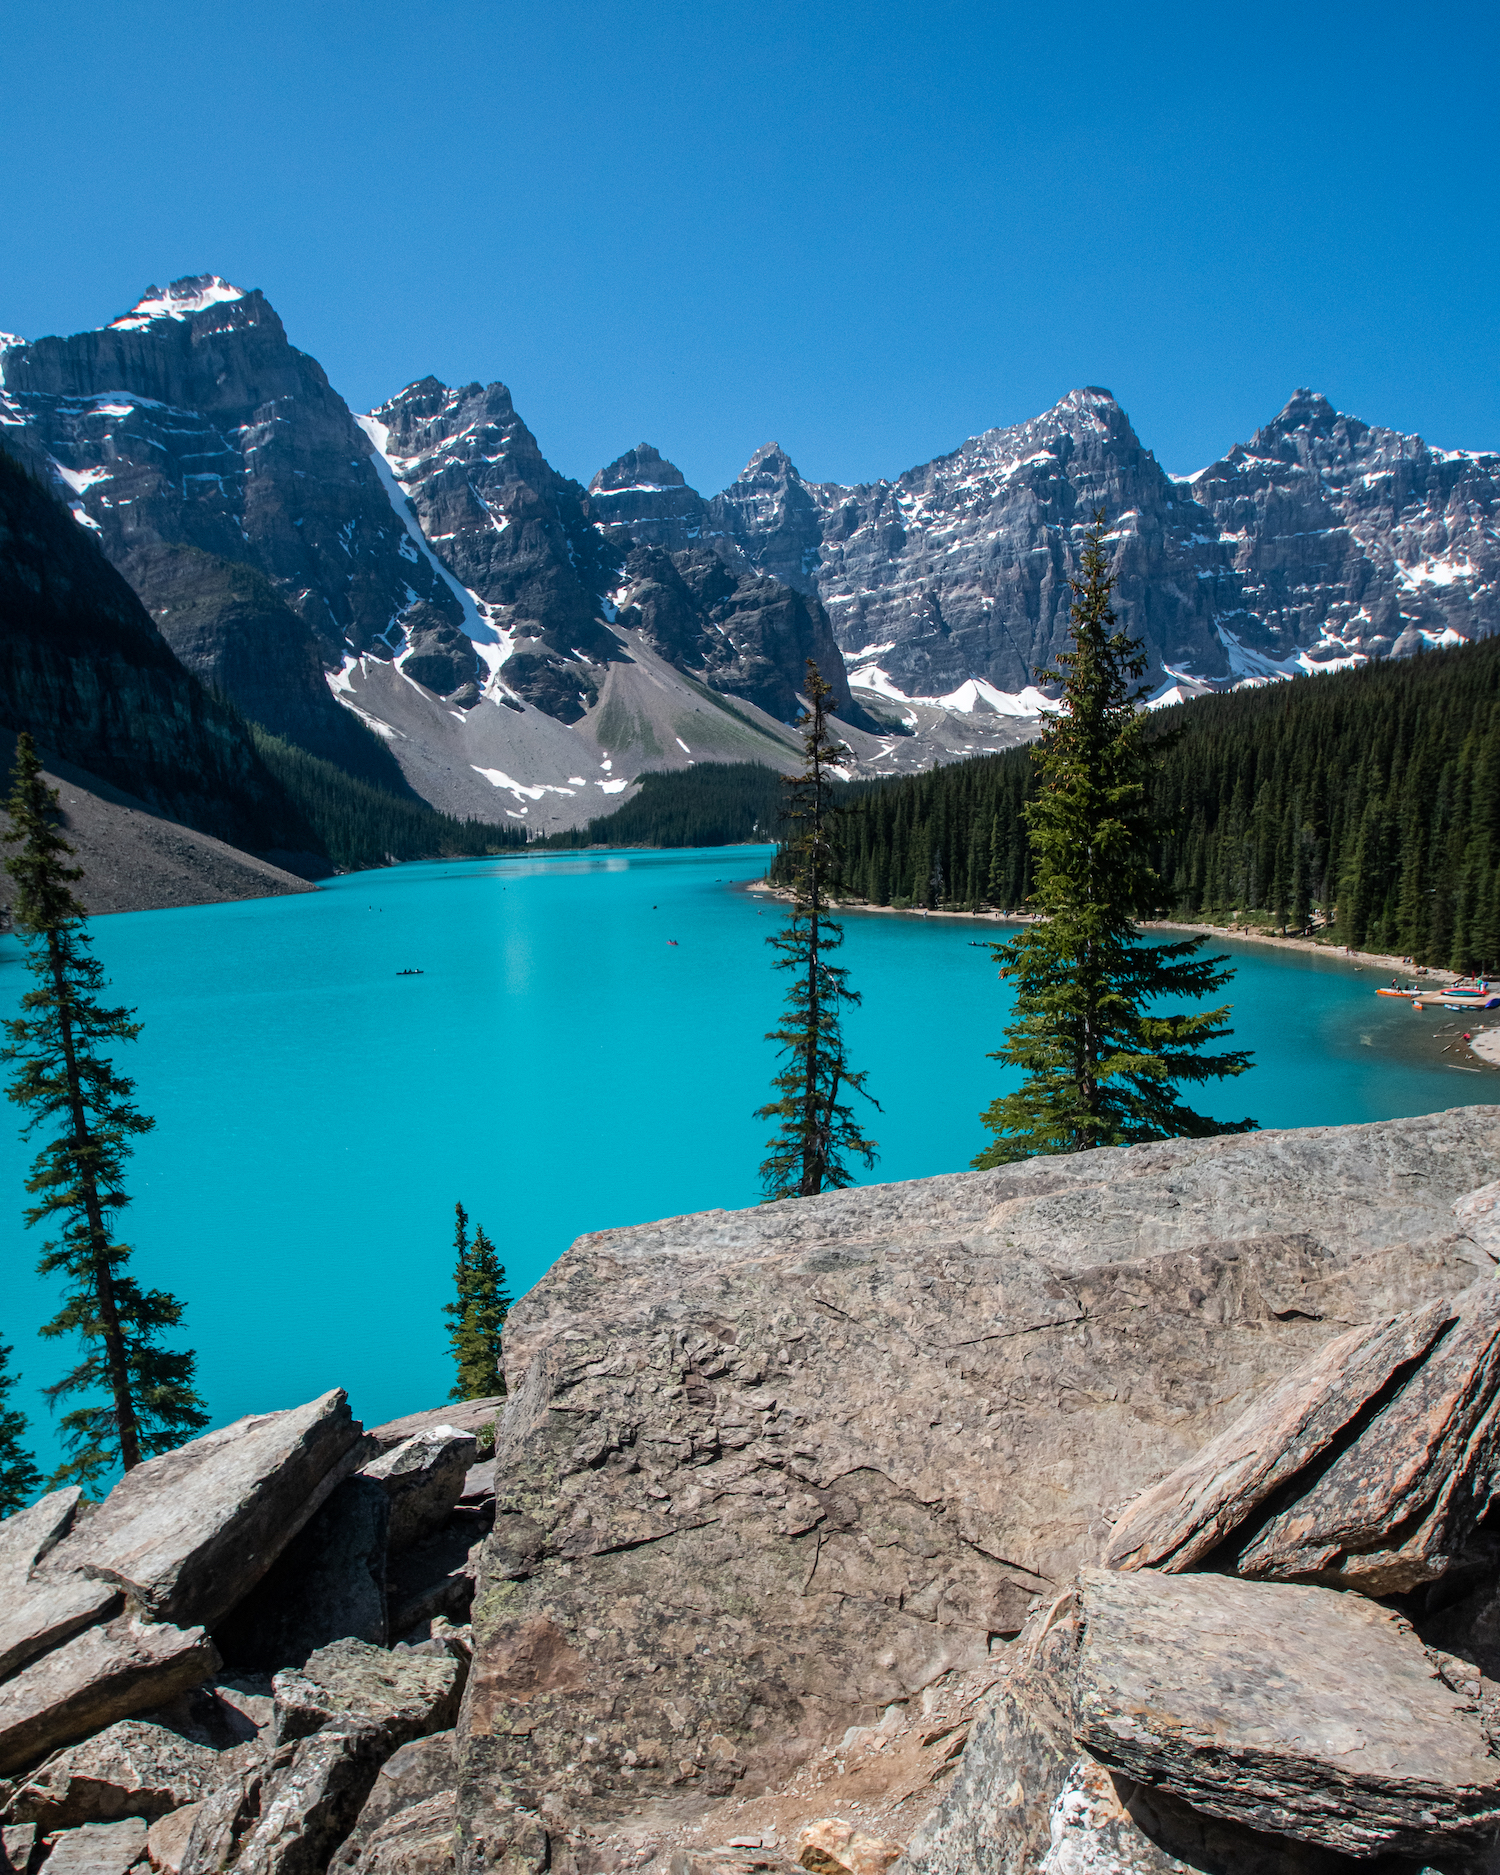 Moraine Lake with blue waters and jagged mountain peaks